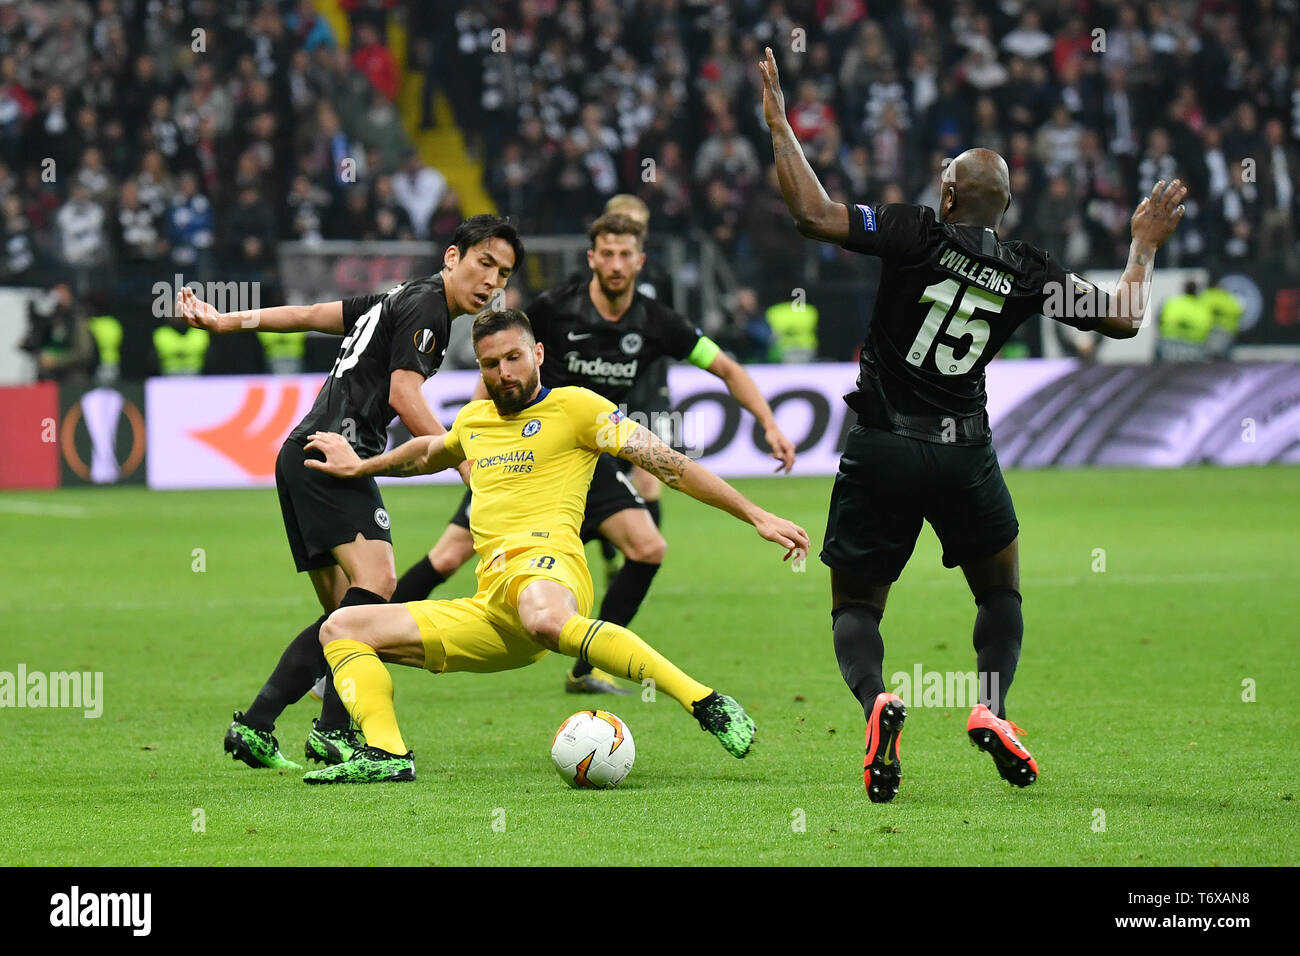 Frankfur, Germany. 2nd May, 2019. Hasebe Makoto (1st L) and Jetro Willems (1st R) of Frankfurt vie with Olivier Giroud (2nd L) of Chelsea during the UEFA Europa League semifinal first leg match between Eintracht Frankfurt and Chelsea FC in Frankfurt, Germany, on May 2, 2019. The match ended in a 1-1 draw. Credit: Ulrich Hufnagel/Xinhua/Alamy Live News Stock Photo